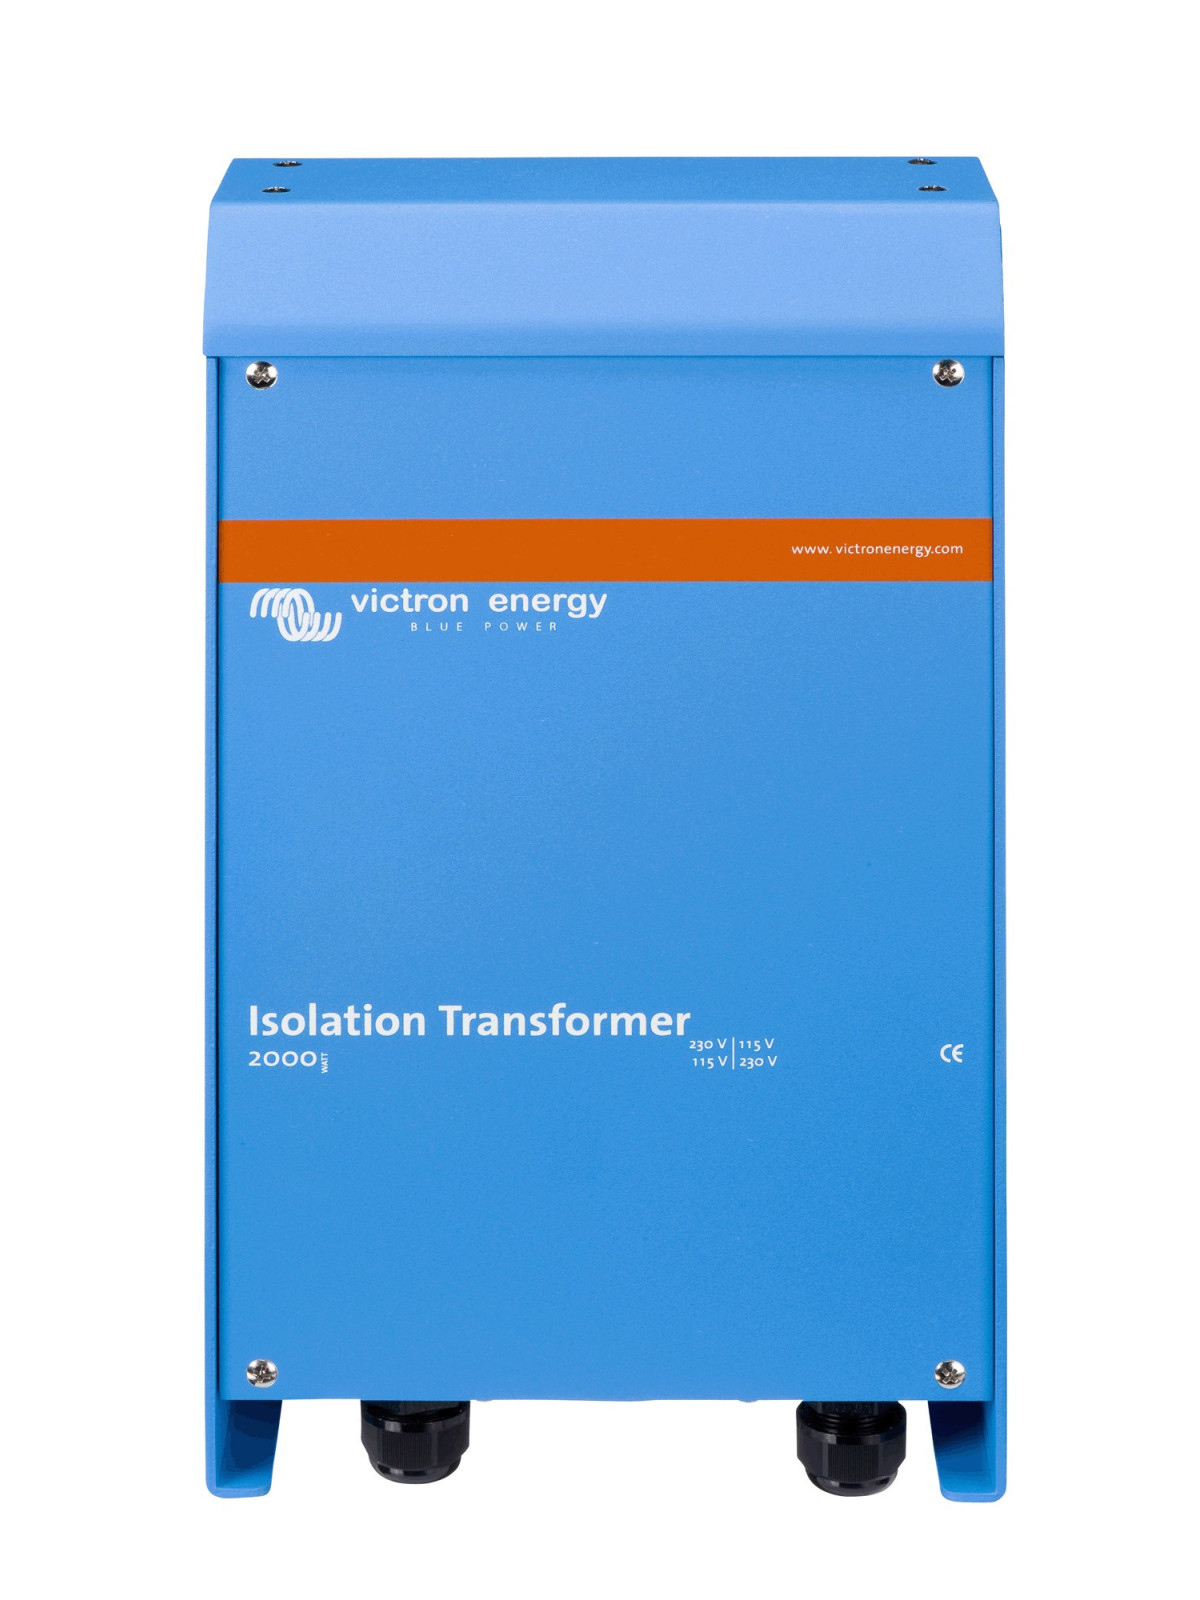 Isolation transformer Victron 2000, 3600, 3600 auto and 7000W